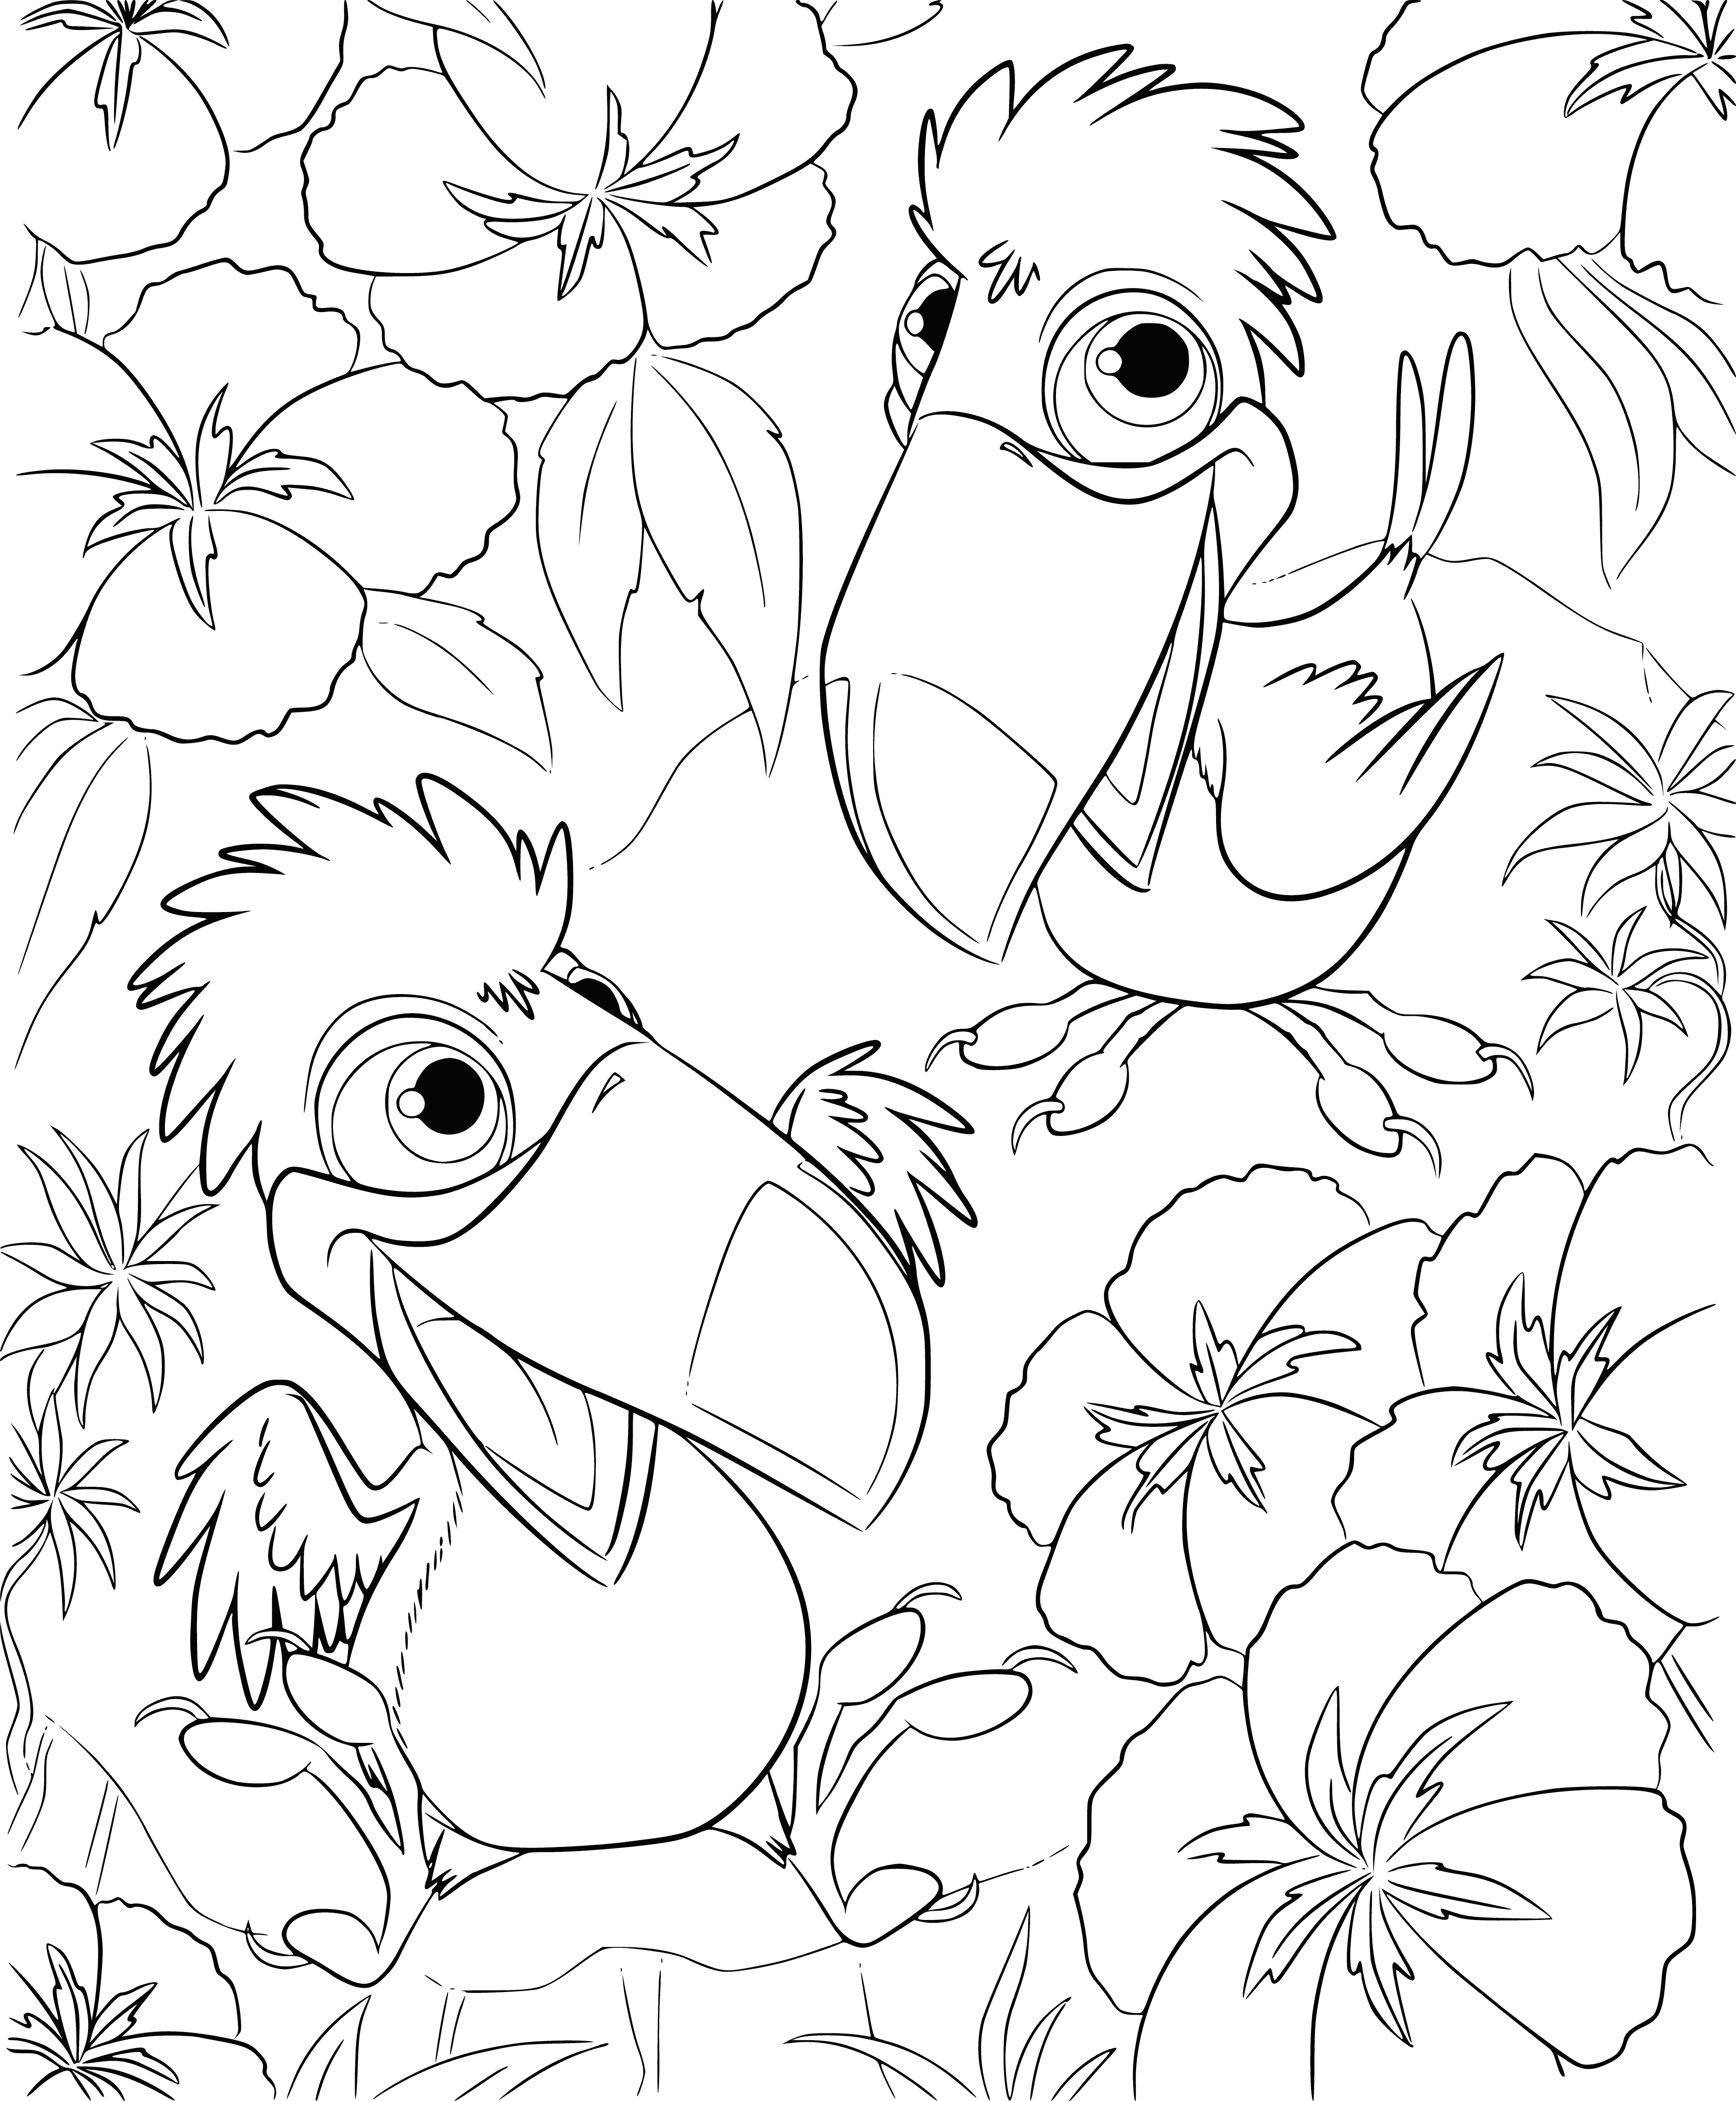 Toucans coloring page